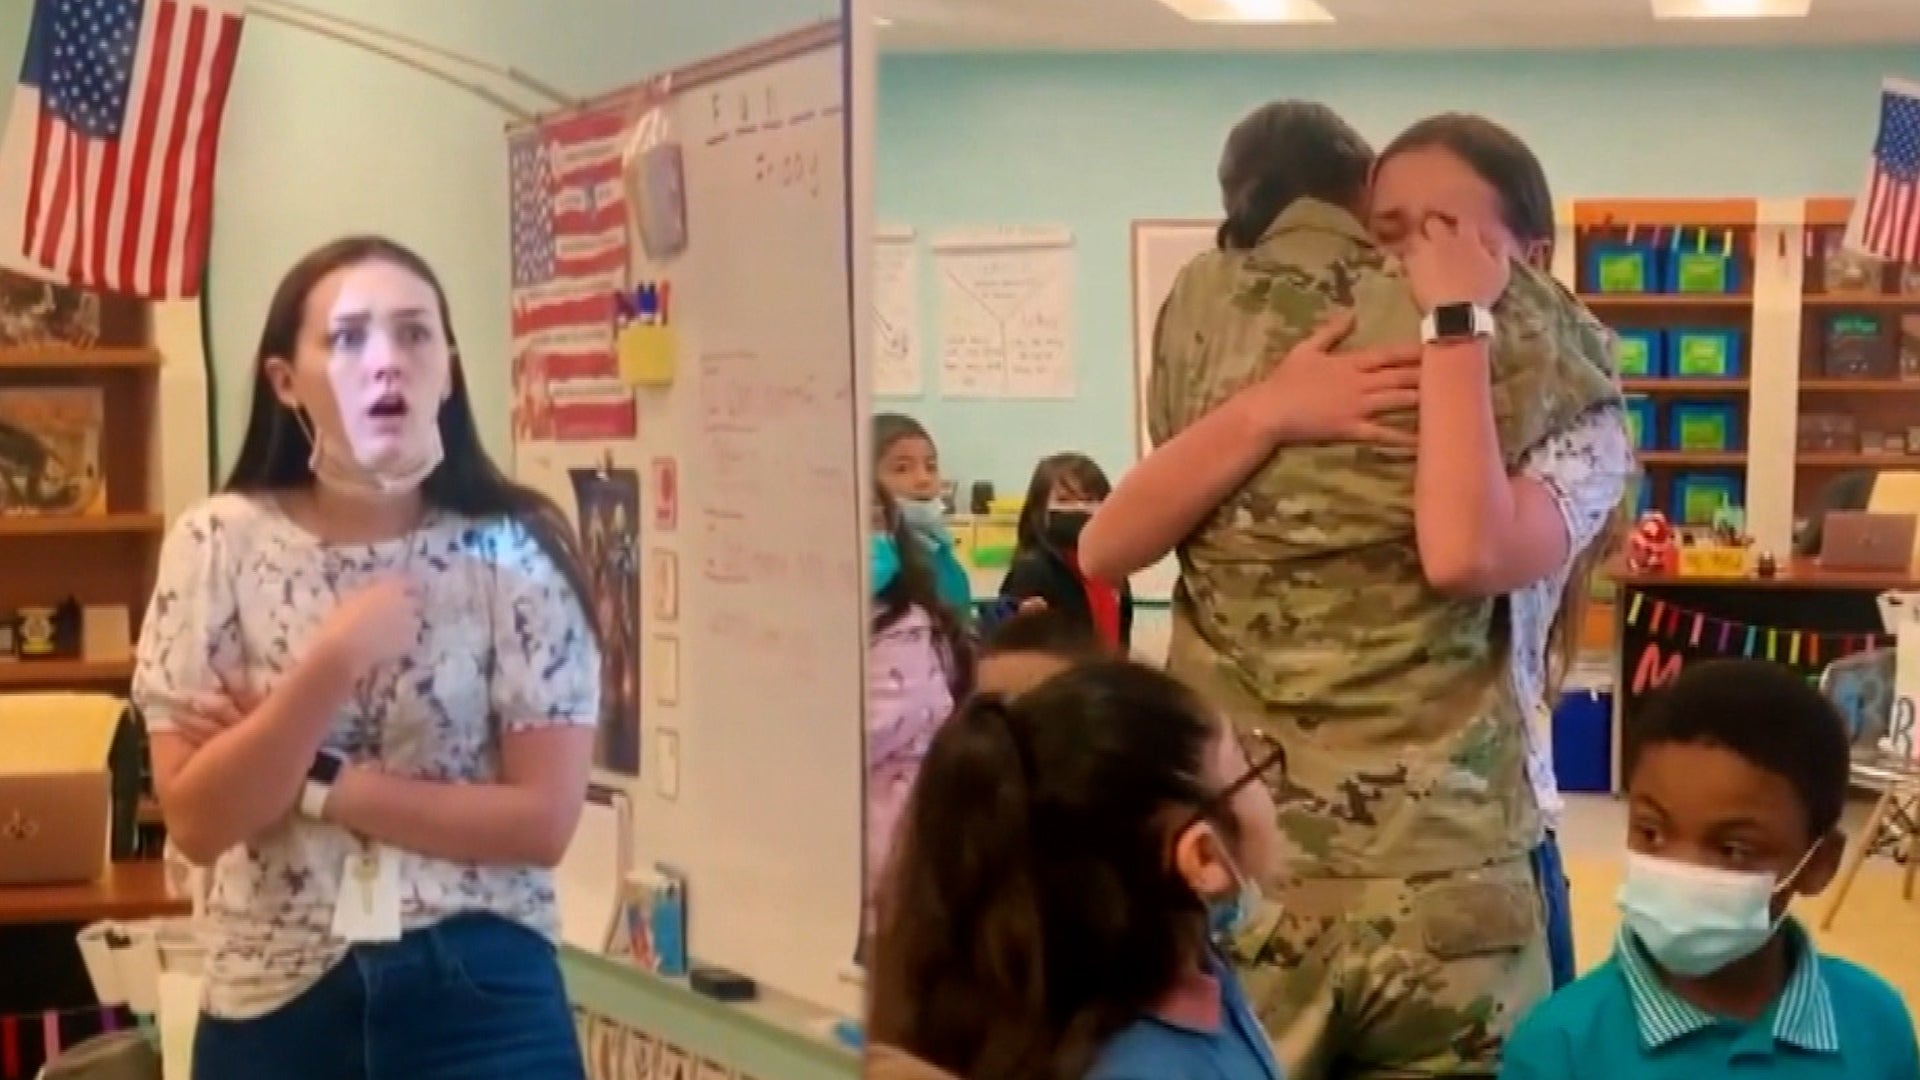 Military Mom Surprises Daughter At School After Returning From Iraq Deployment Inside Edition 2216